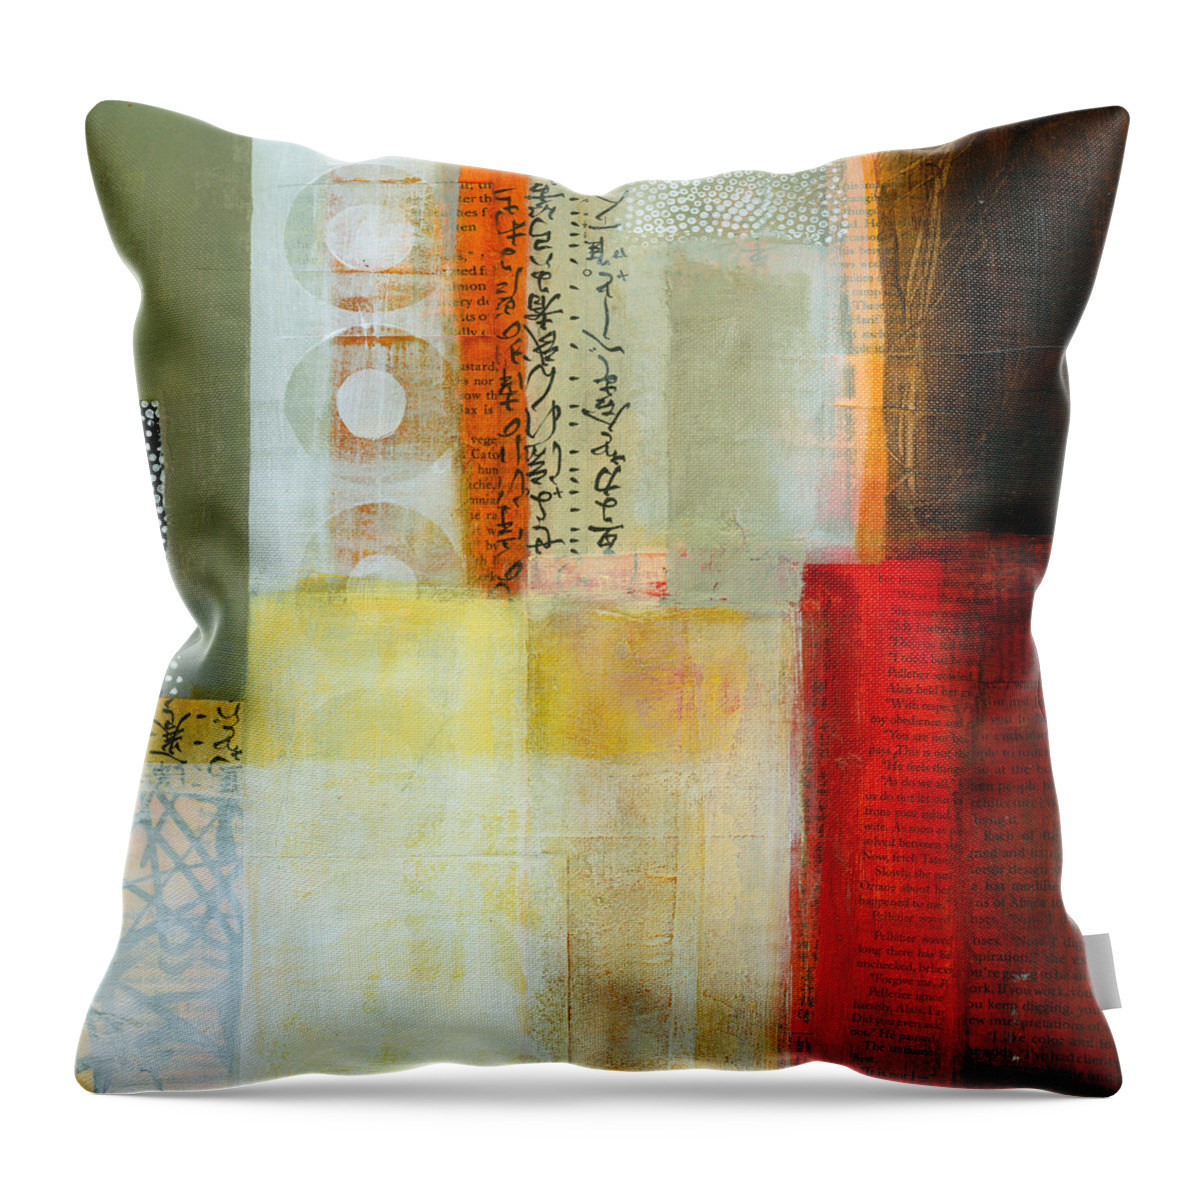 Acrylic Throw Pillow featuring the painting Edge Location 7 by Jane Davies